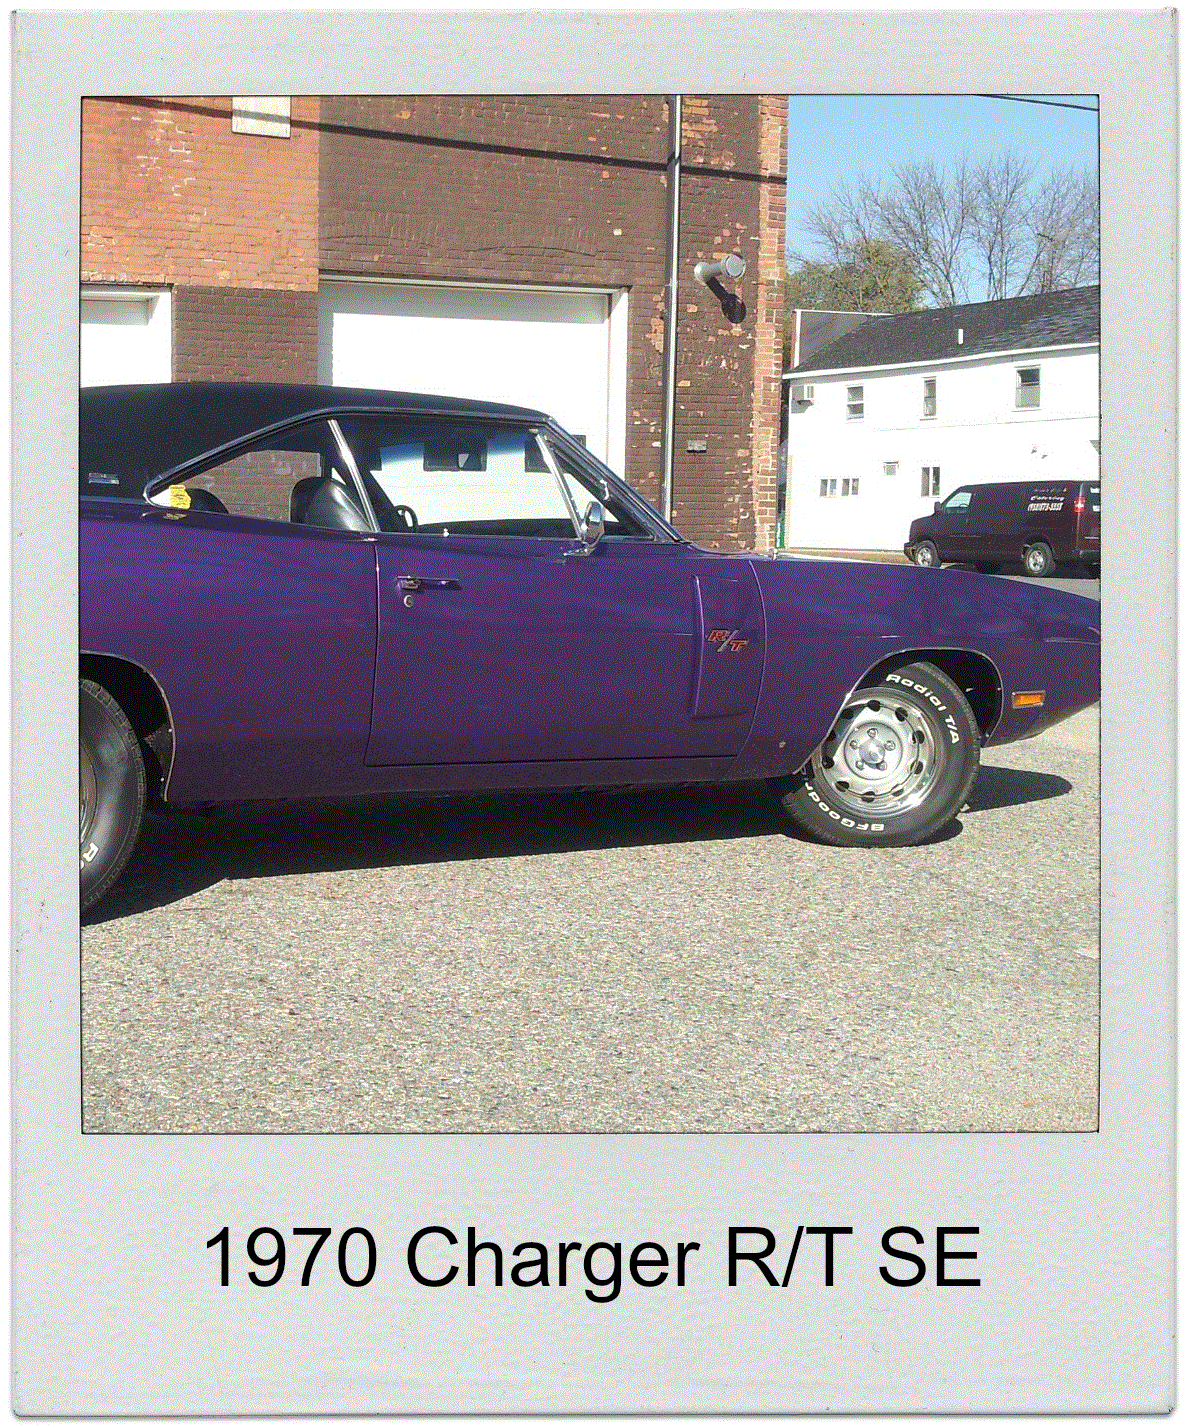 1970 Charger R/T SE